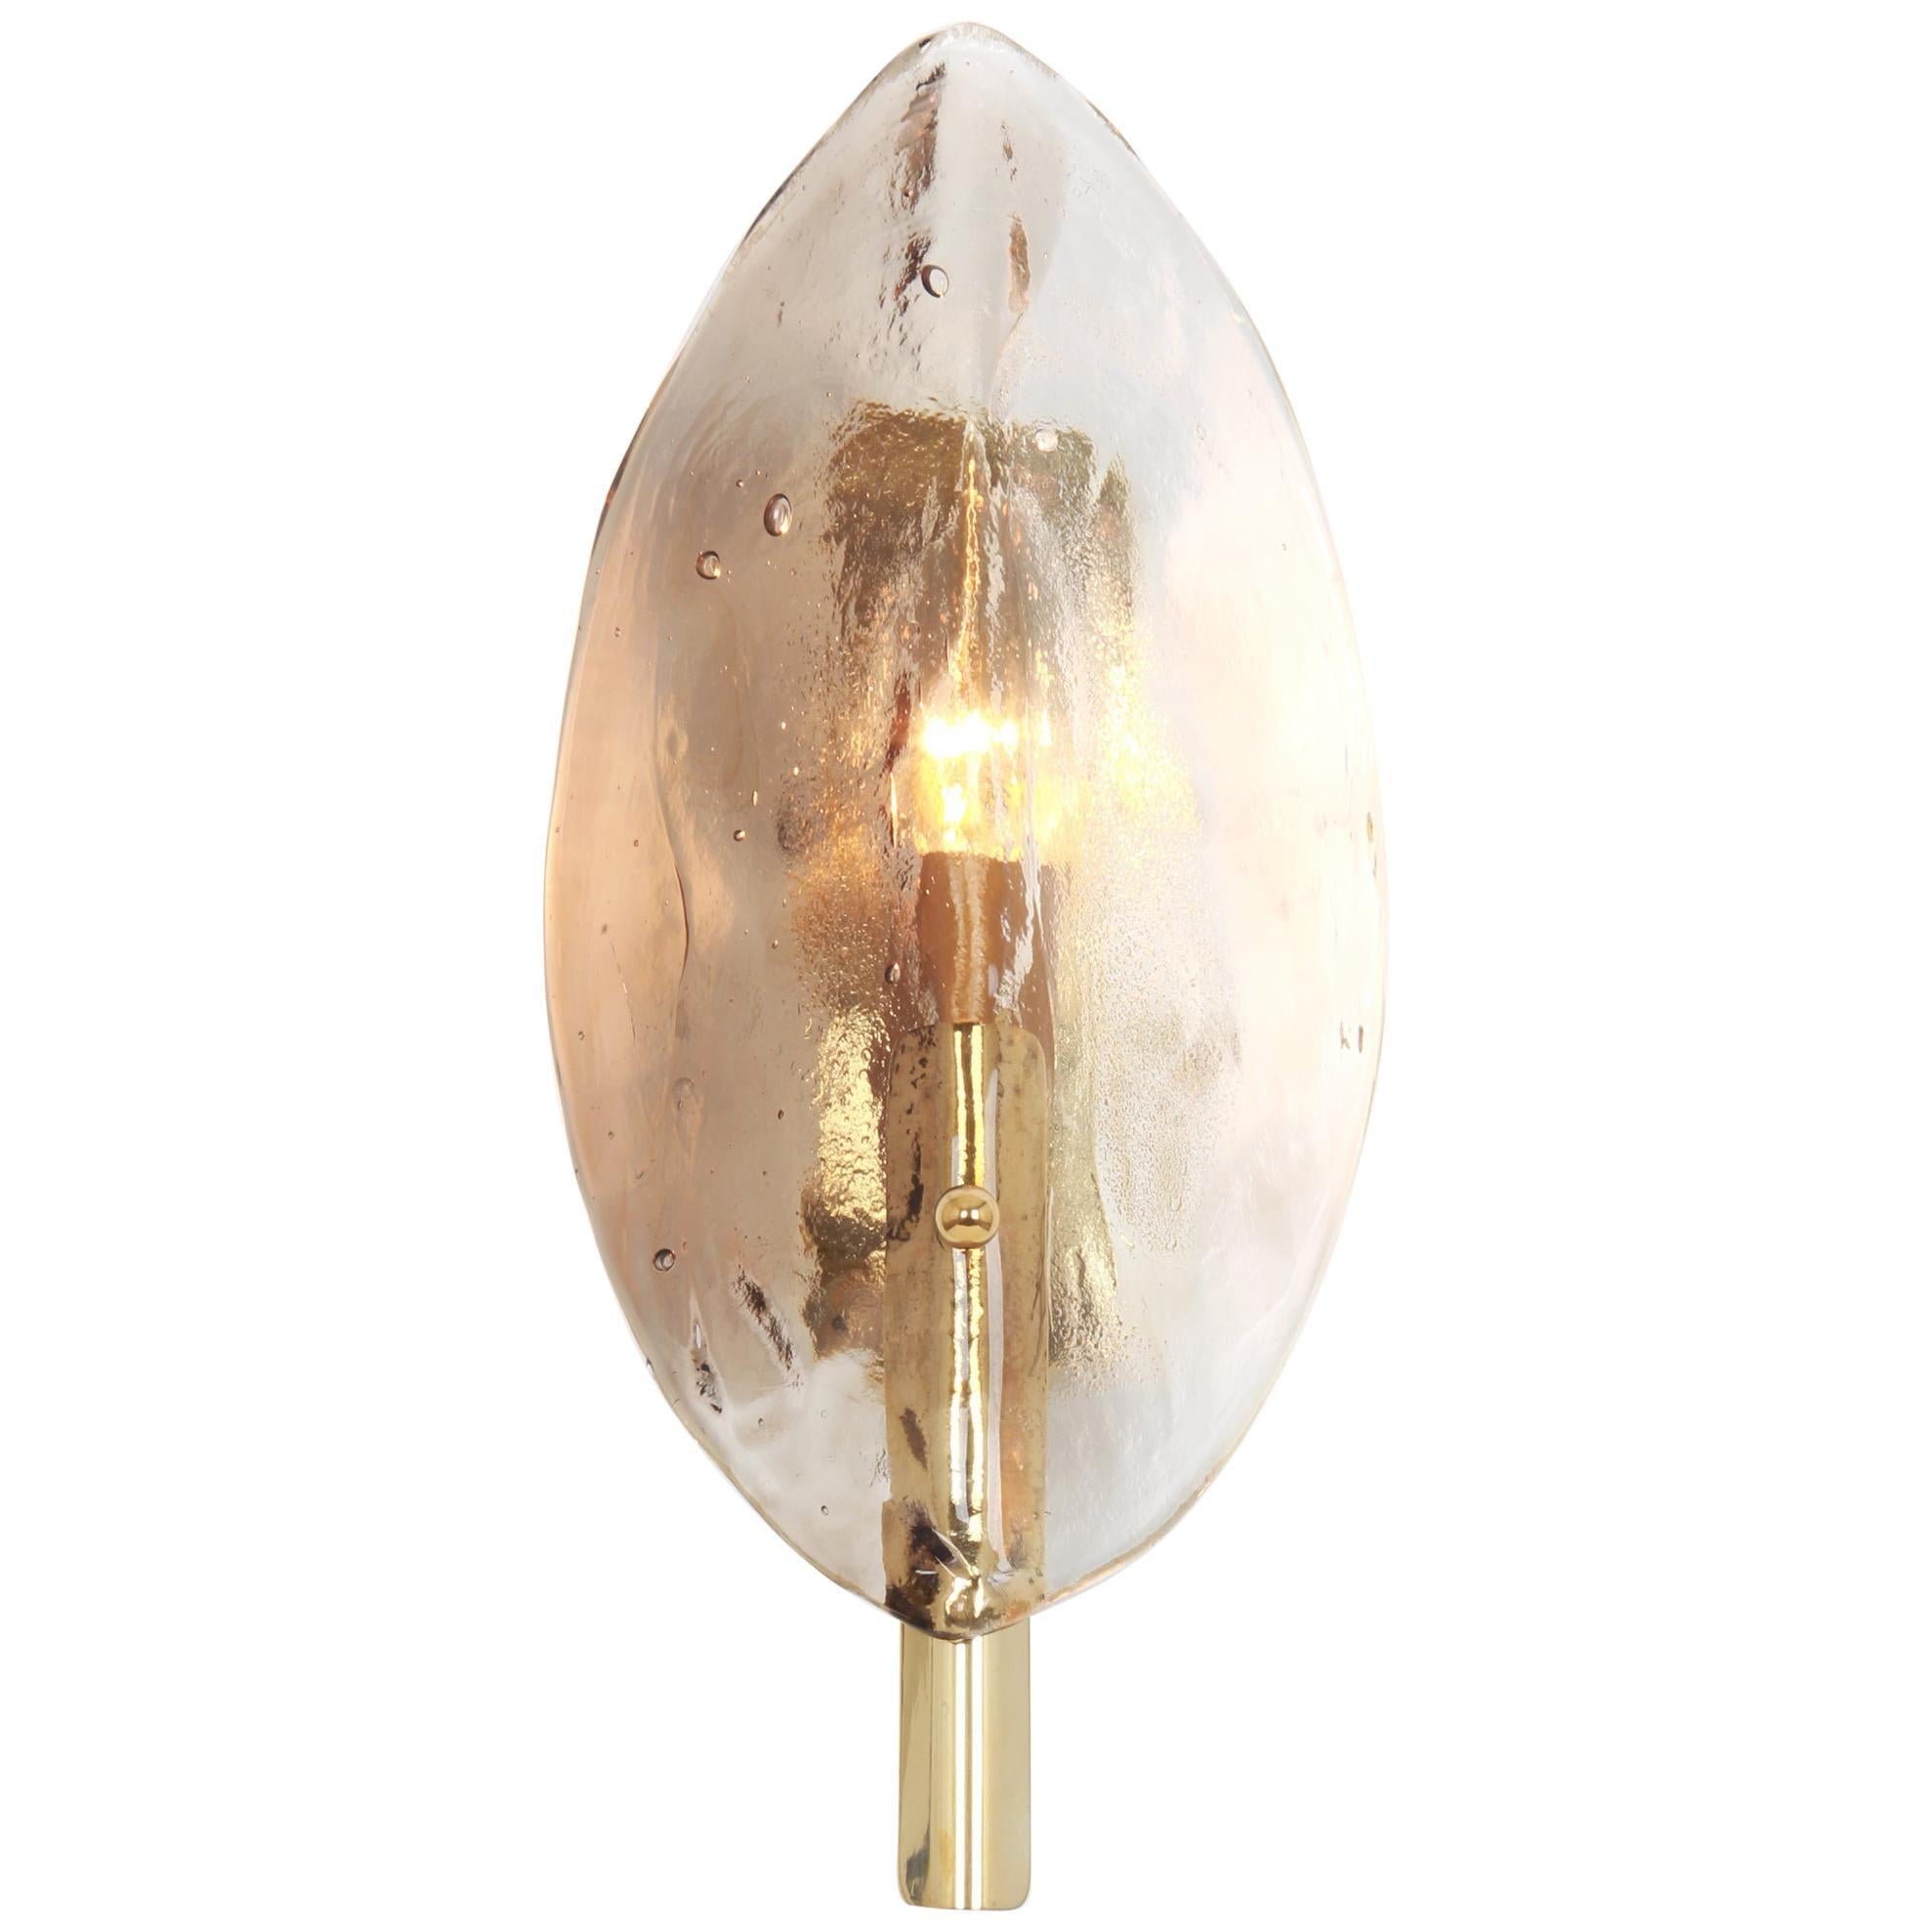 Wonderful Set of 2 midcentury wall sconces with handcrafted Smoked Murano glass pieces on a brass base, made by J. T. Kalmar, Austria, manufactured, circa 1970-1979.
High quality and in very good condition. Cleaned, well-wired, and ready to